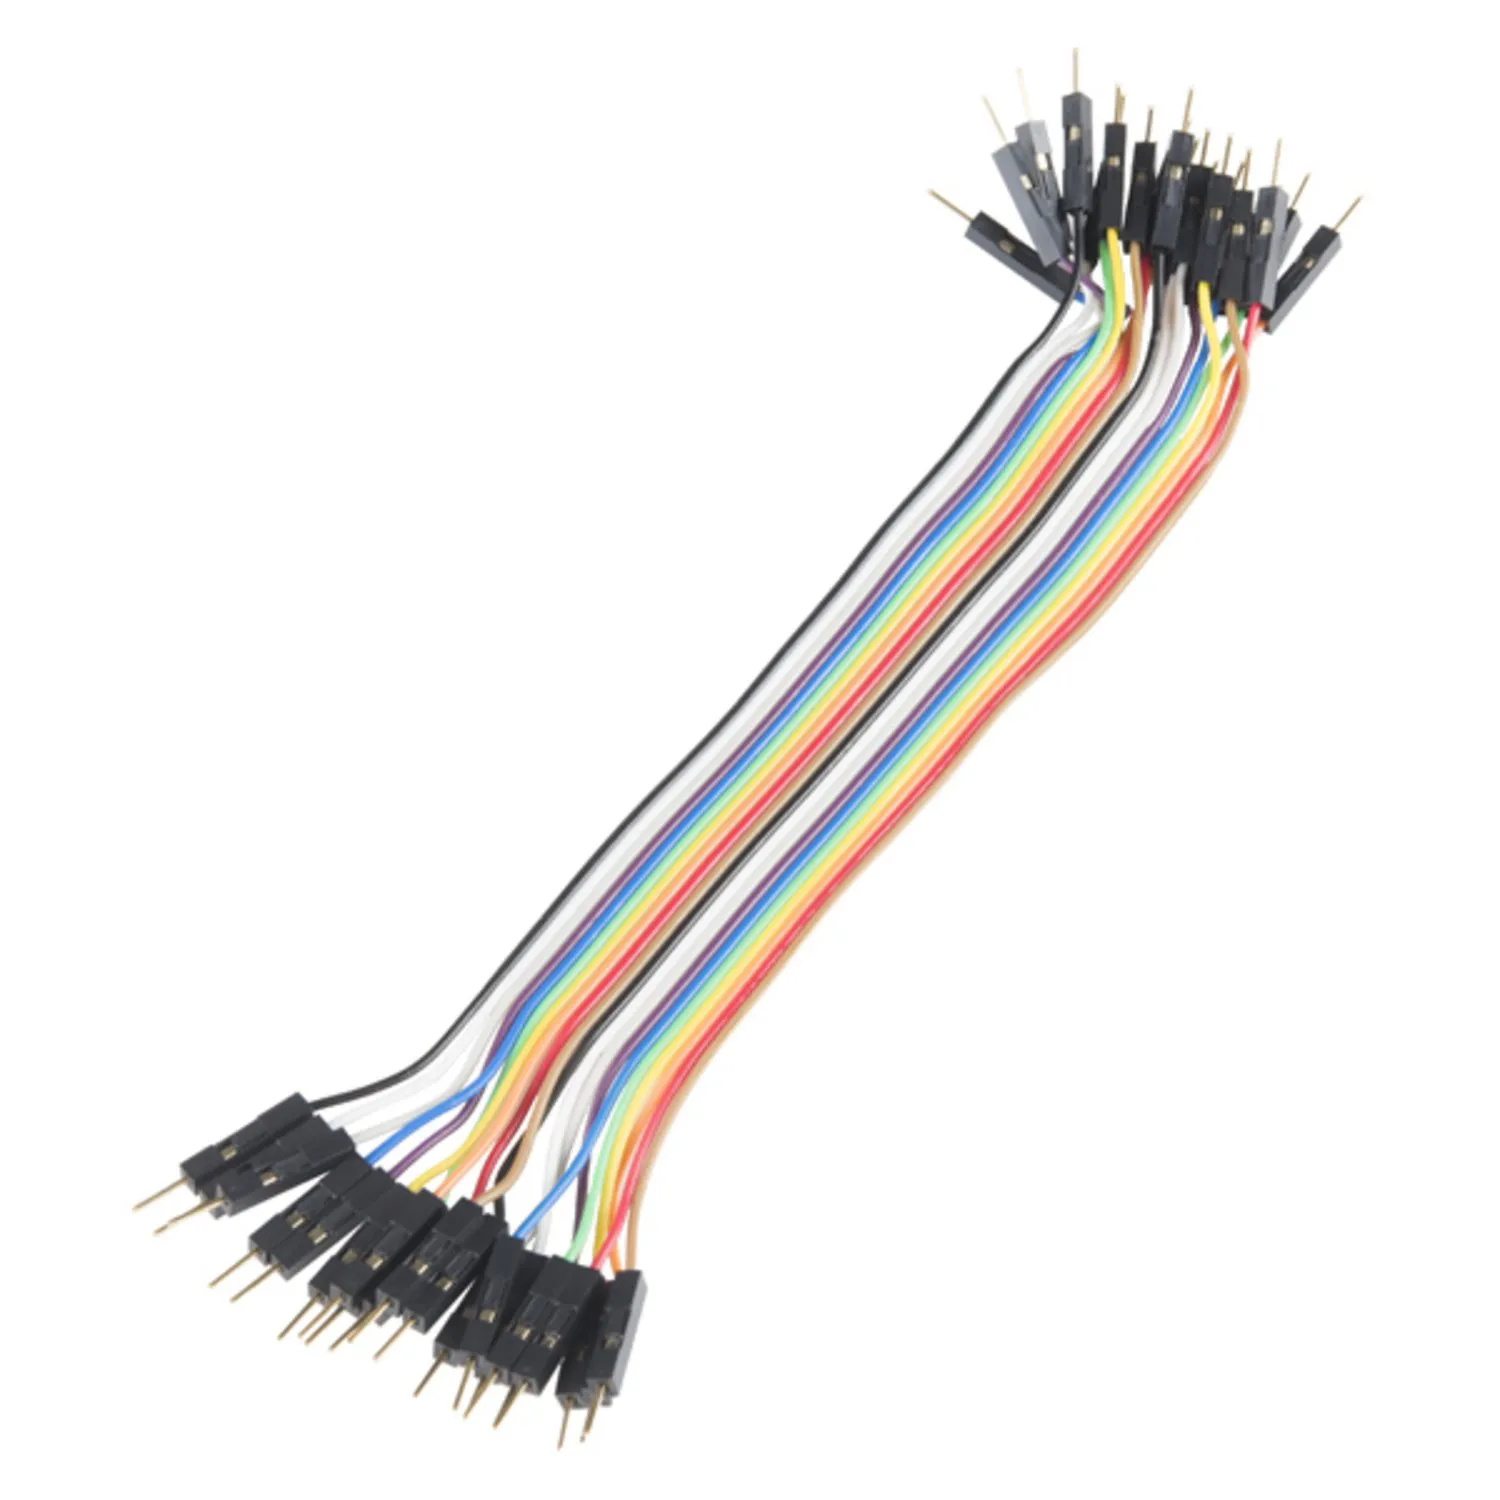 Photo of Jumper Wires - Connected 6 (M/M, 20 pack)